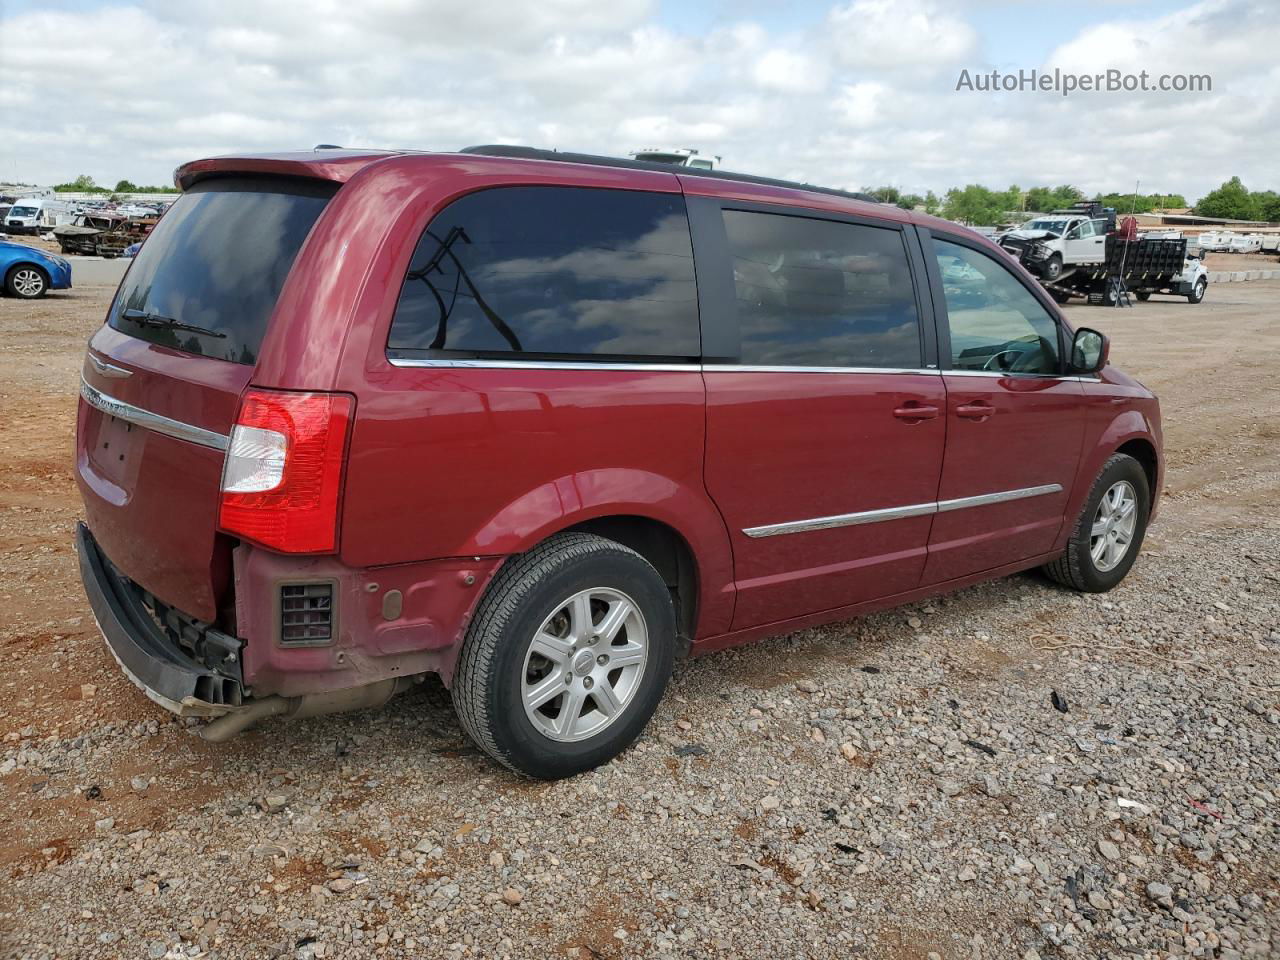 2011 Chrysler Town & Country Touring Темно-бордовый vin: 2A4RR5DG5BR611405